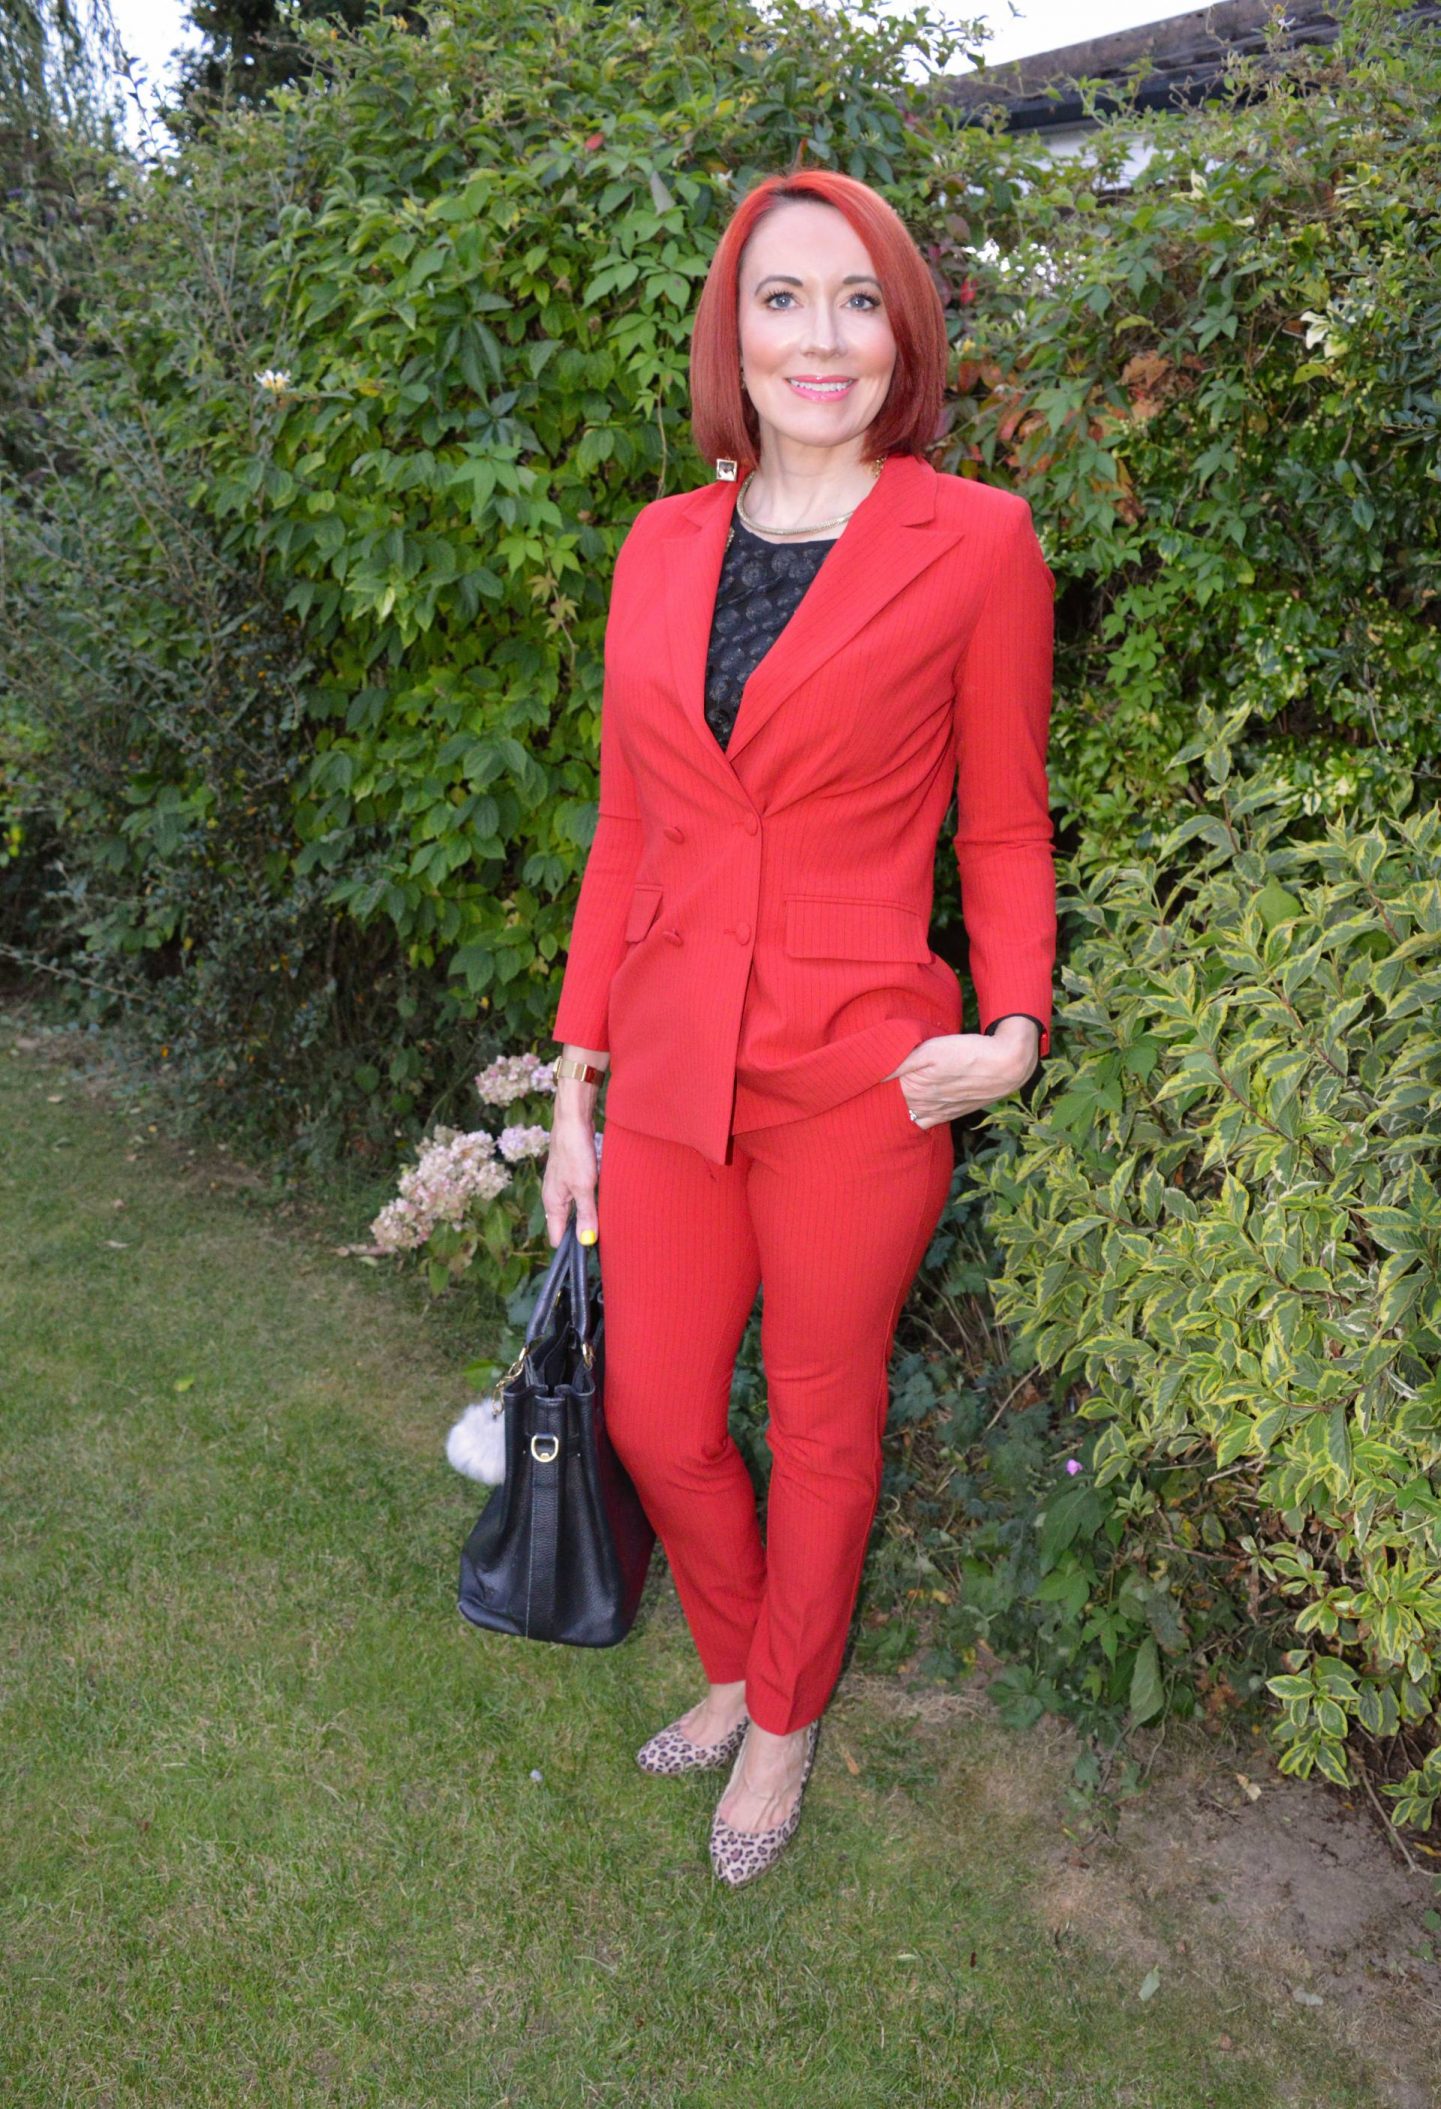 Red Alert Trouser Suit, Style & Suit Red Alert blazer and trousers